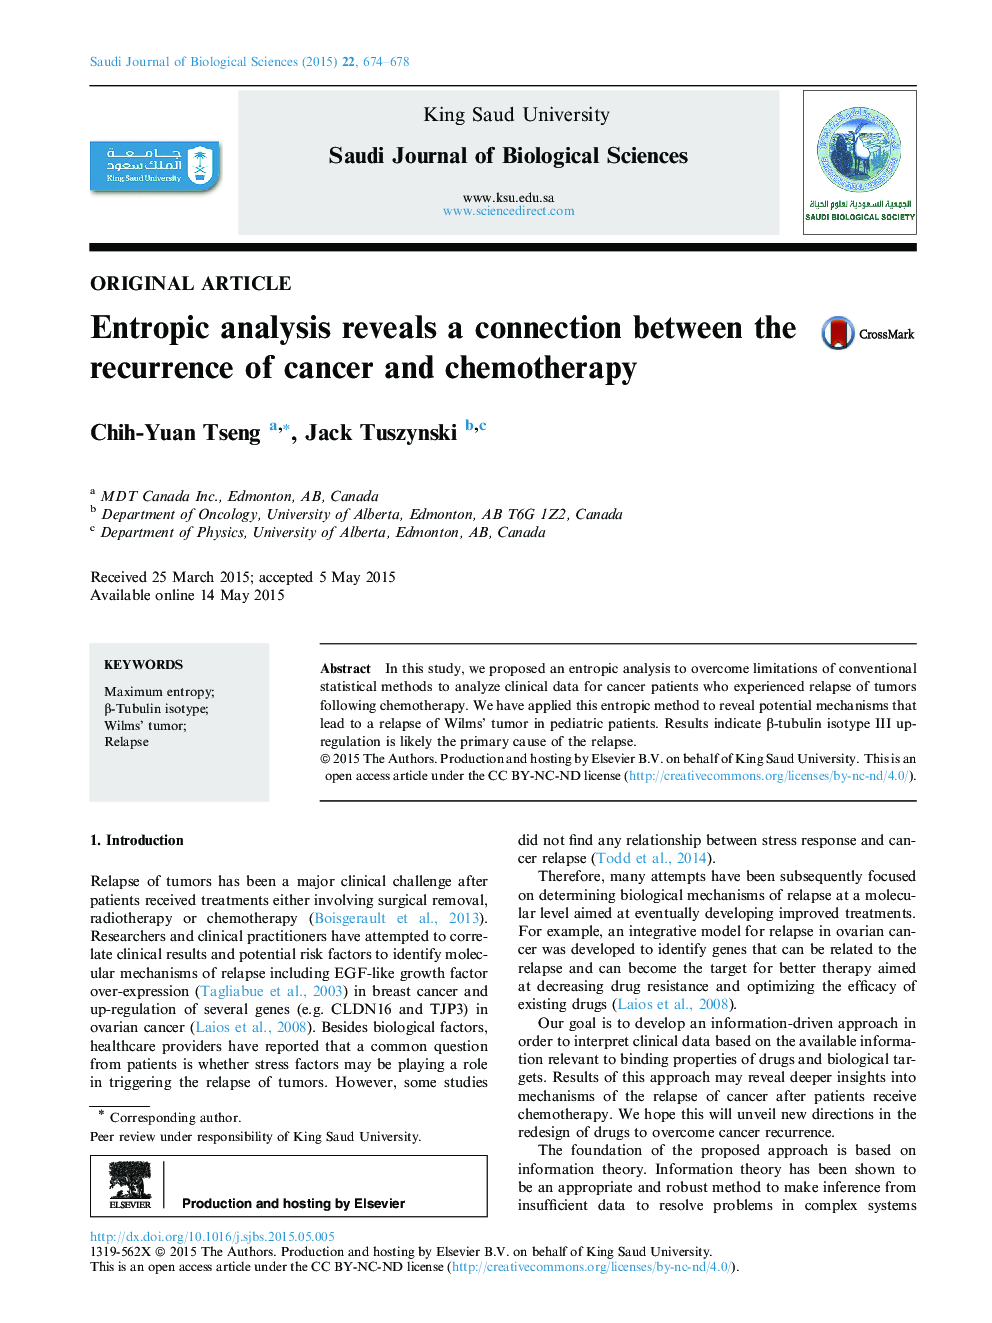 Entropic analysis reveals a connection between the recurrence of cancer and chemotherapy 